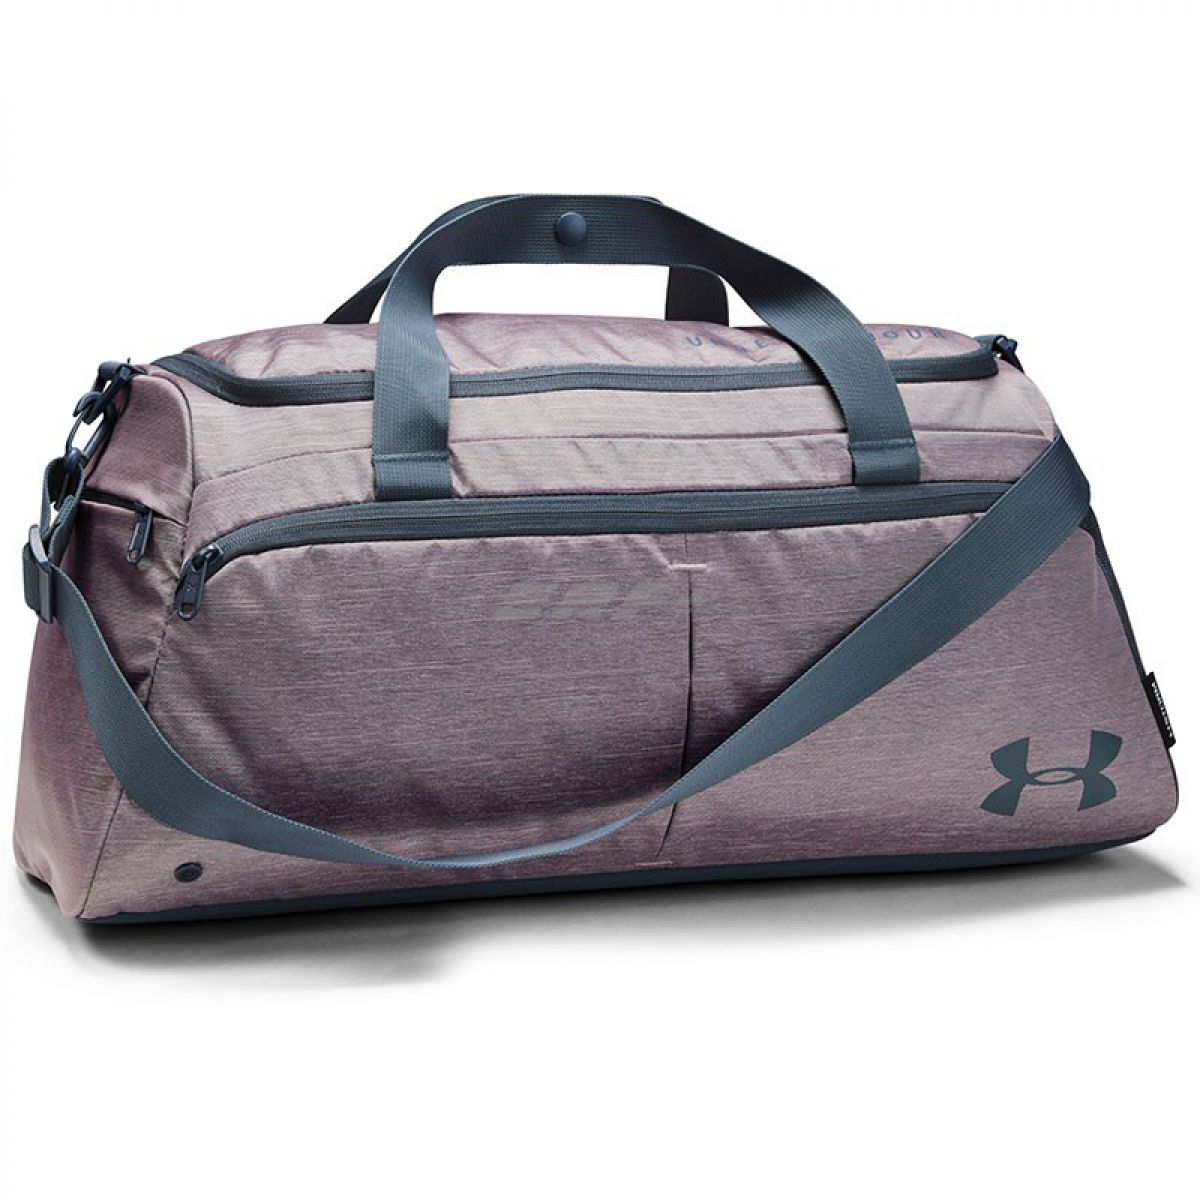  UNDER ARMOUR Undeniable Duffel